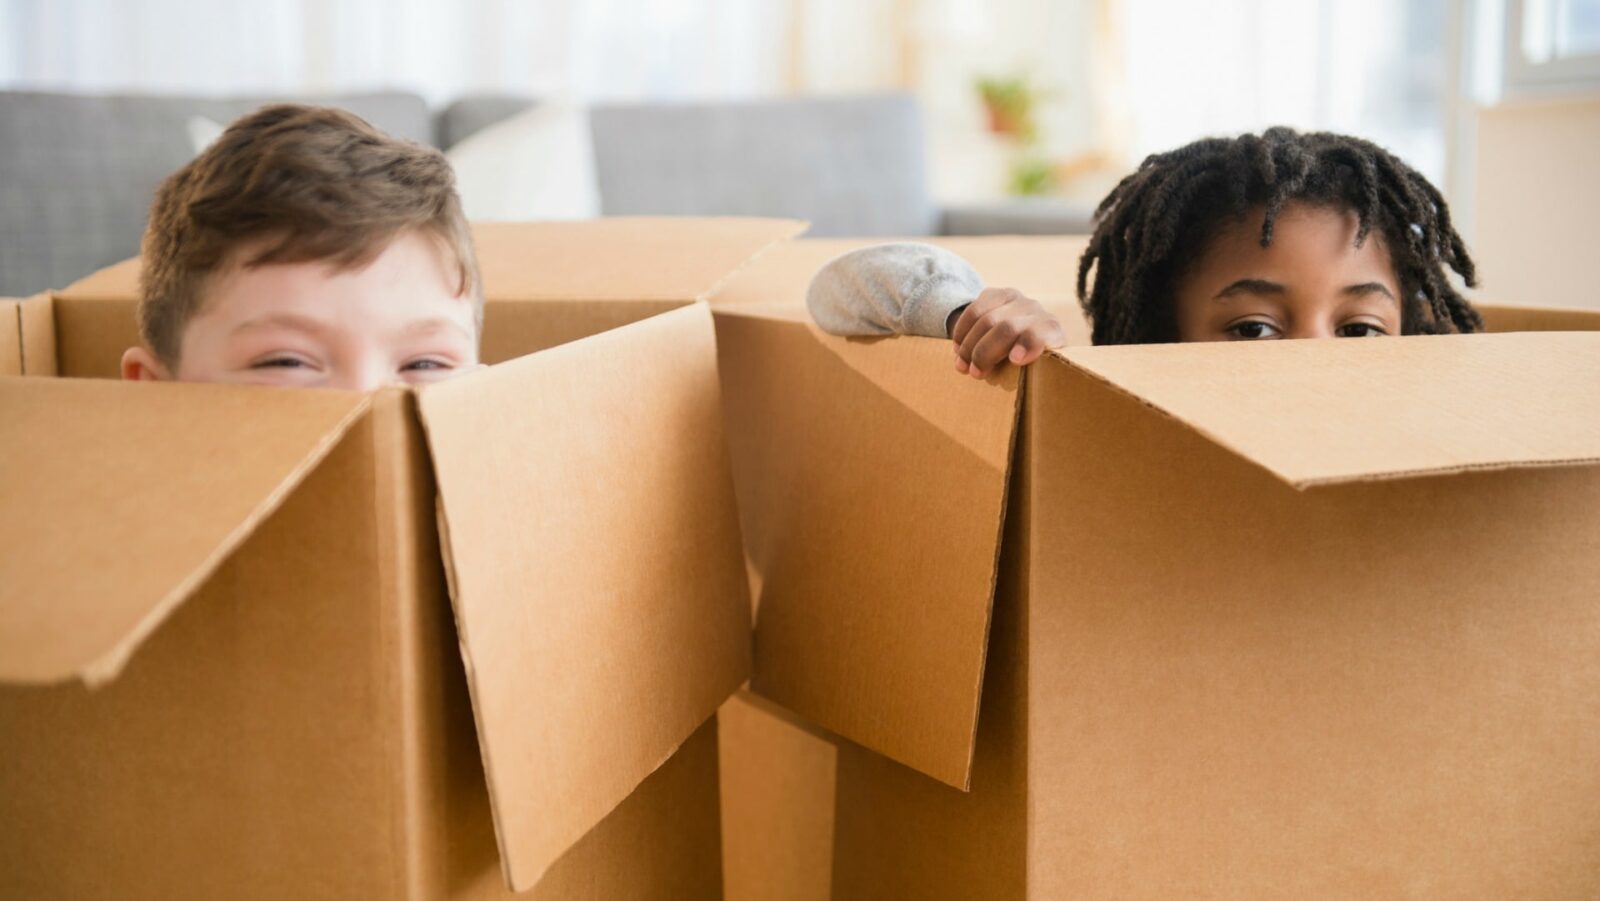 🏠 Declutter Your Home and We’ll Reveal What You Should Get Rid of from Your Life children cardboard boxes